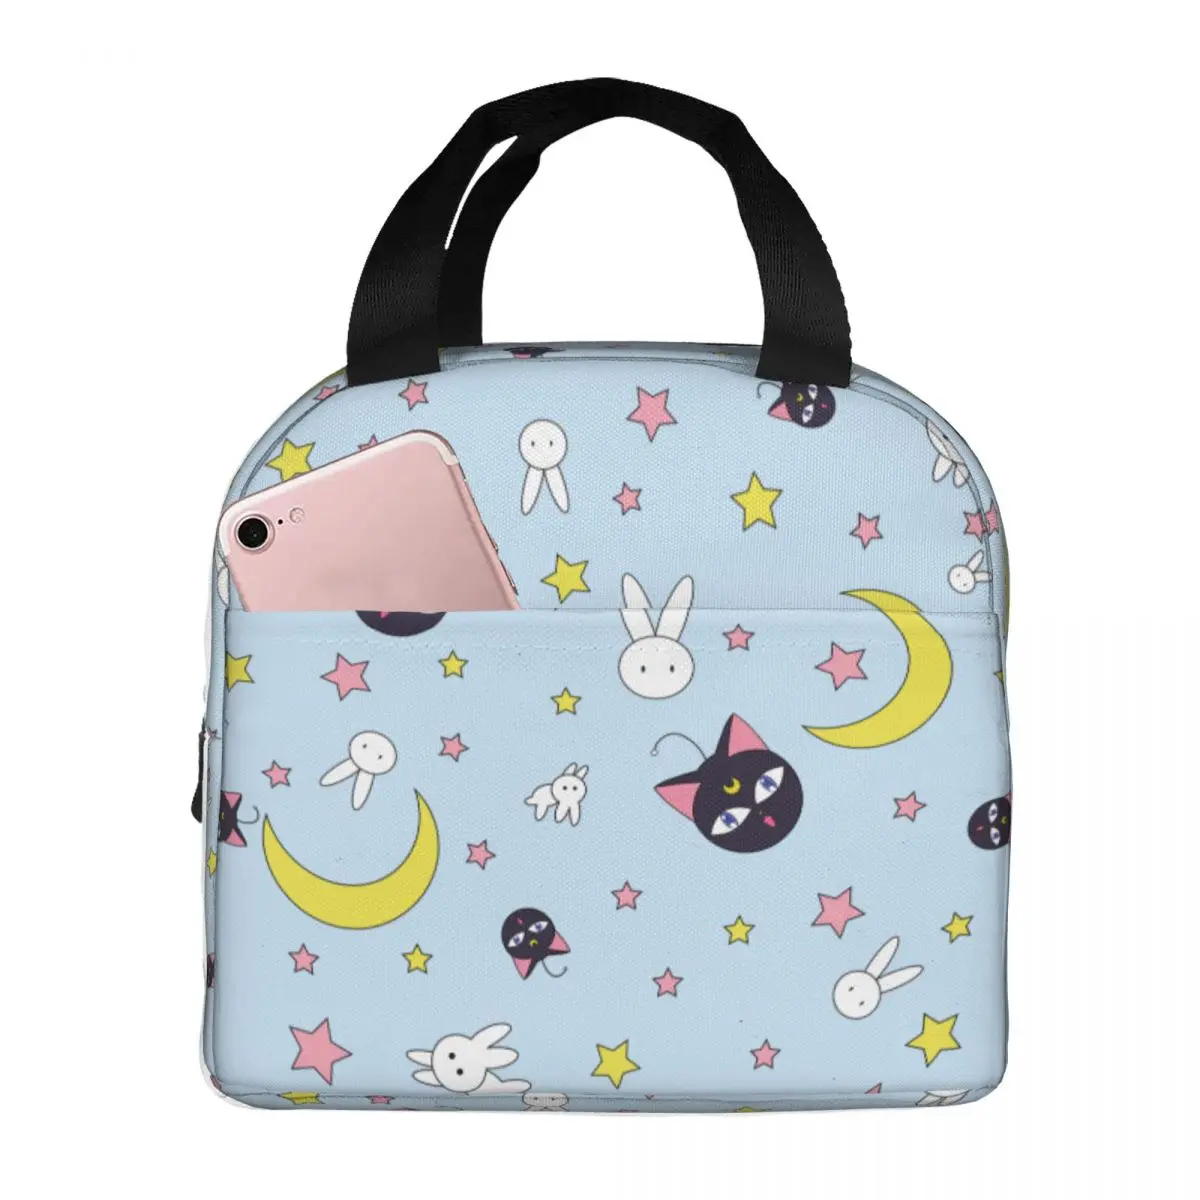 Lunch Bags for Women Kids Moon Rabbit Bunny Insulated Cooler Portable Picnic Travel Oxford Tote Bento Pouch